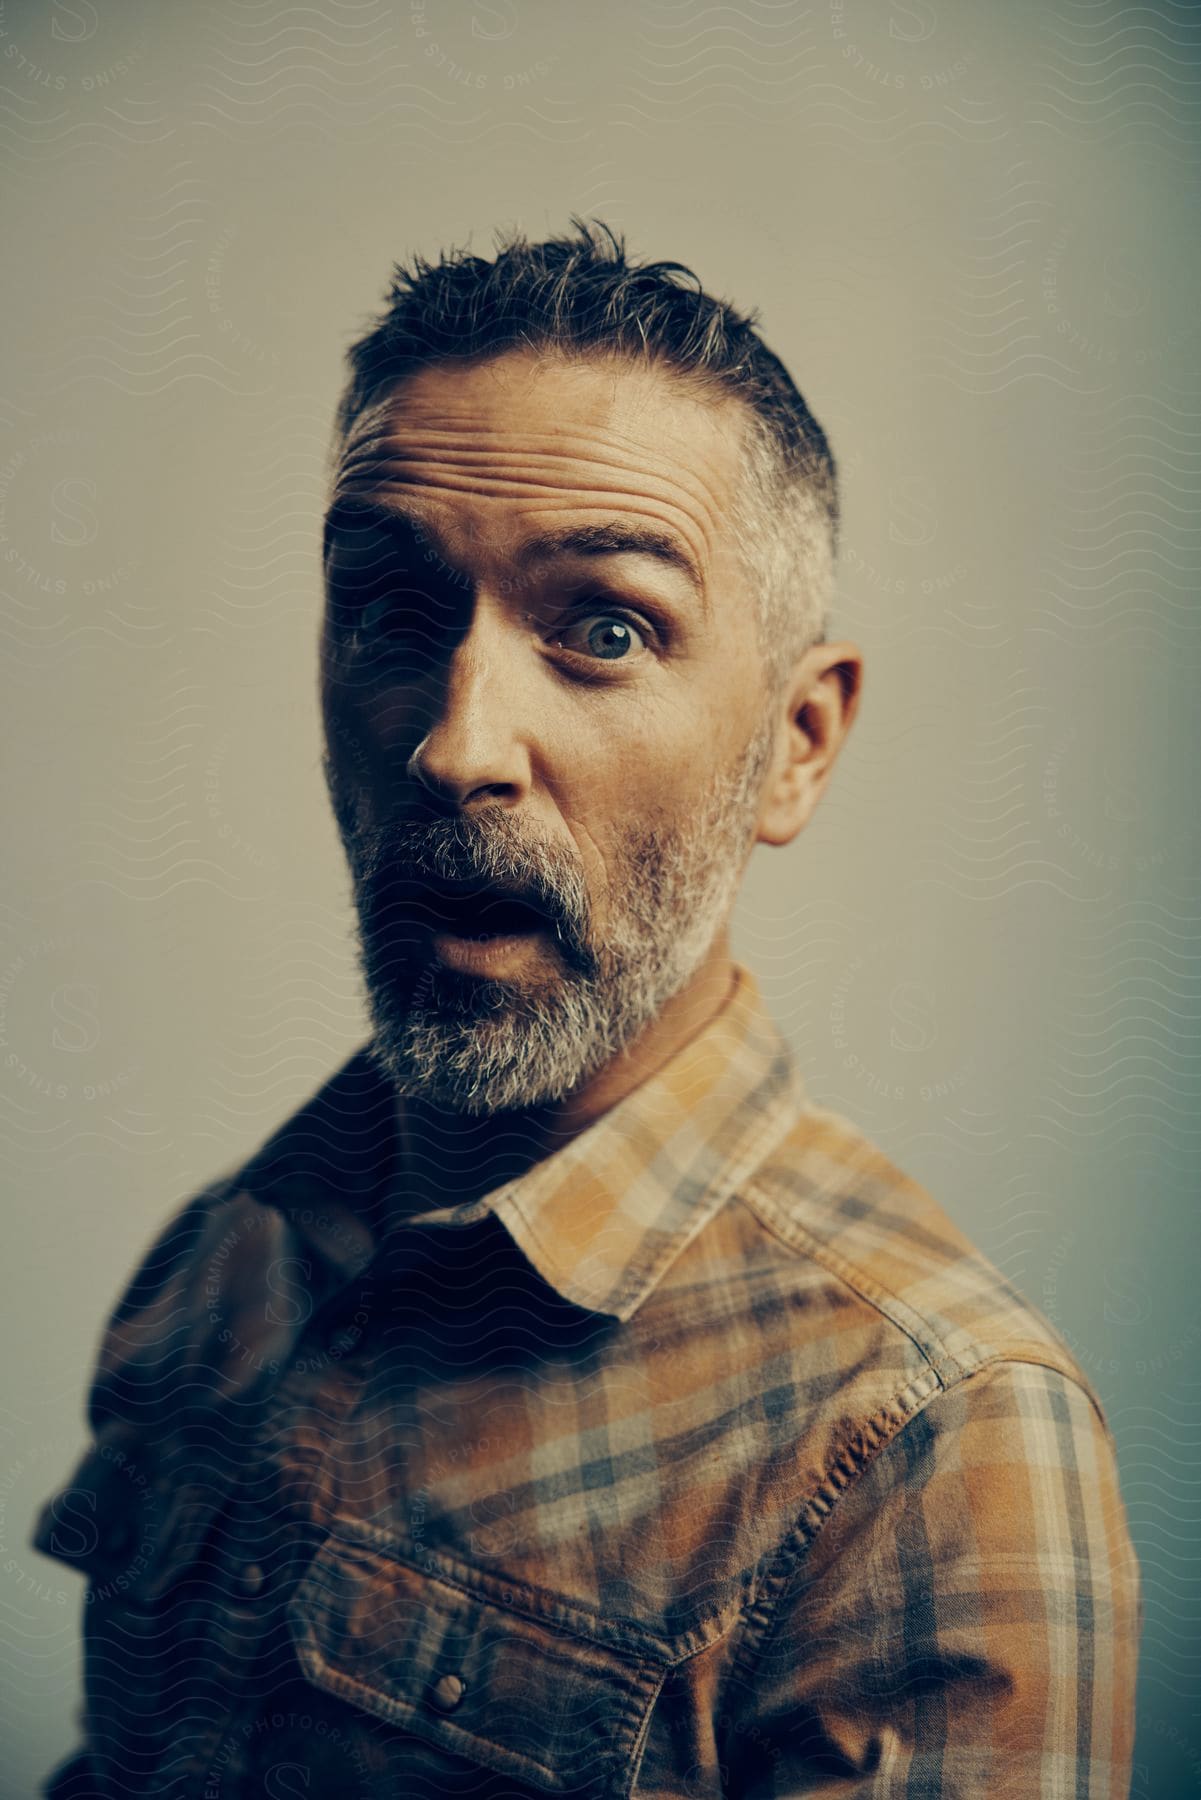 A bearded man wearing a flannel shirt poses with a surprised expression